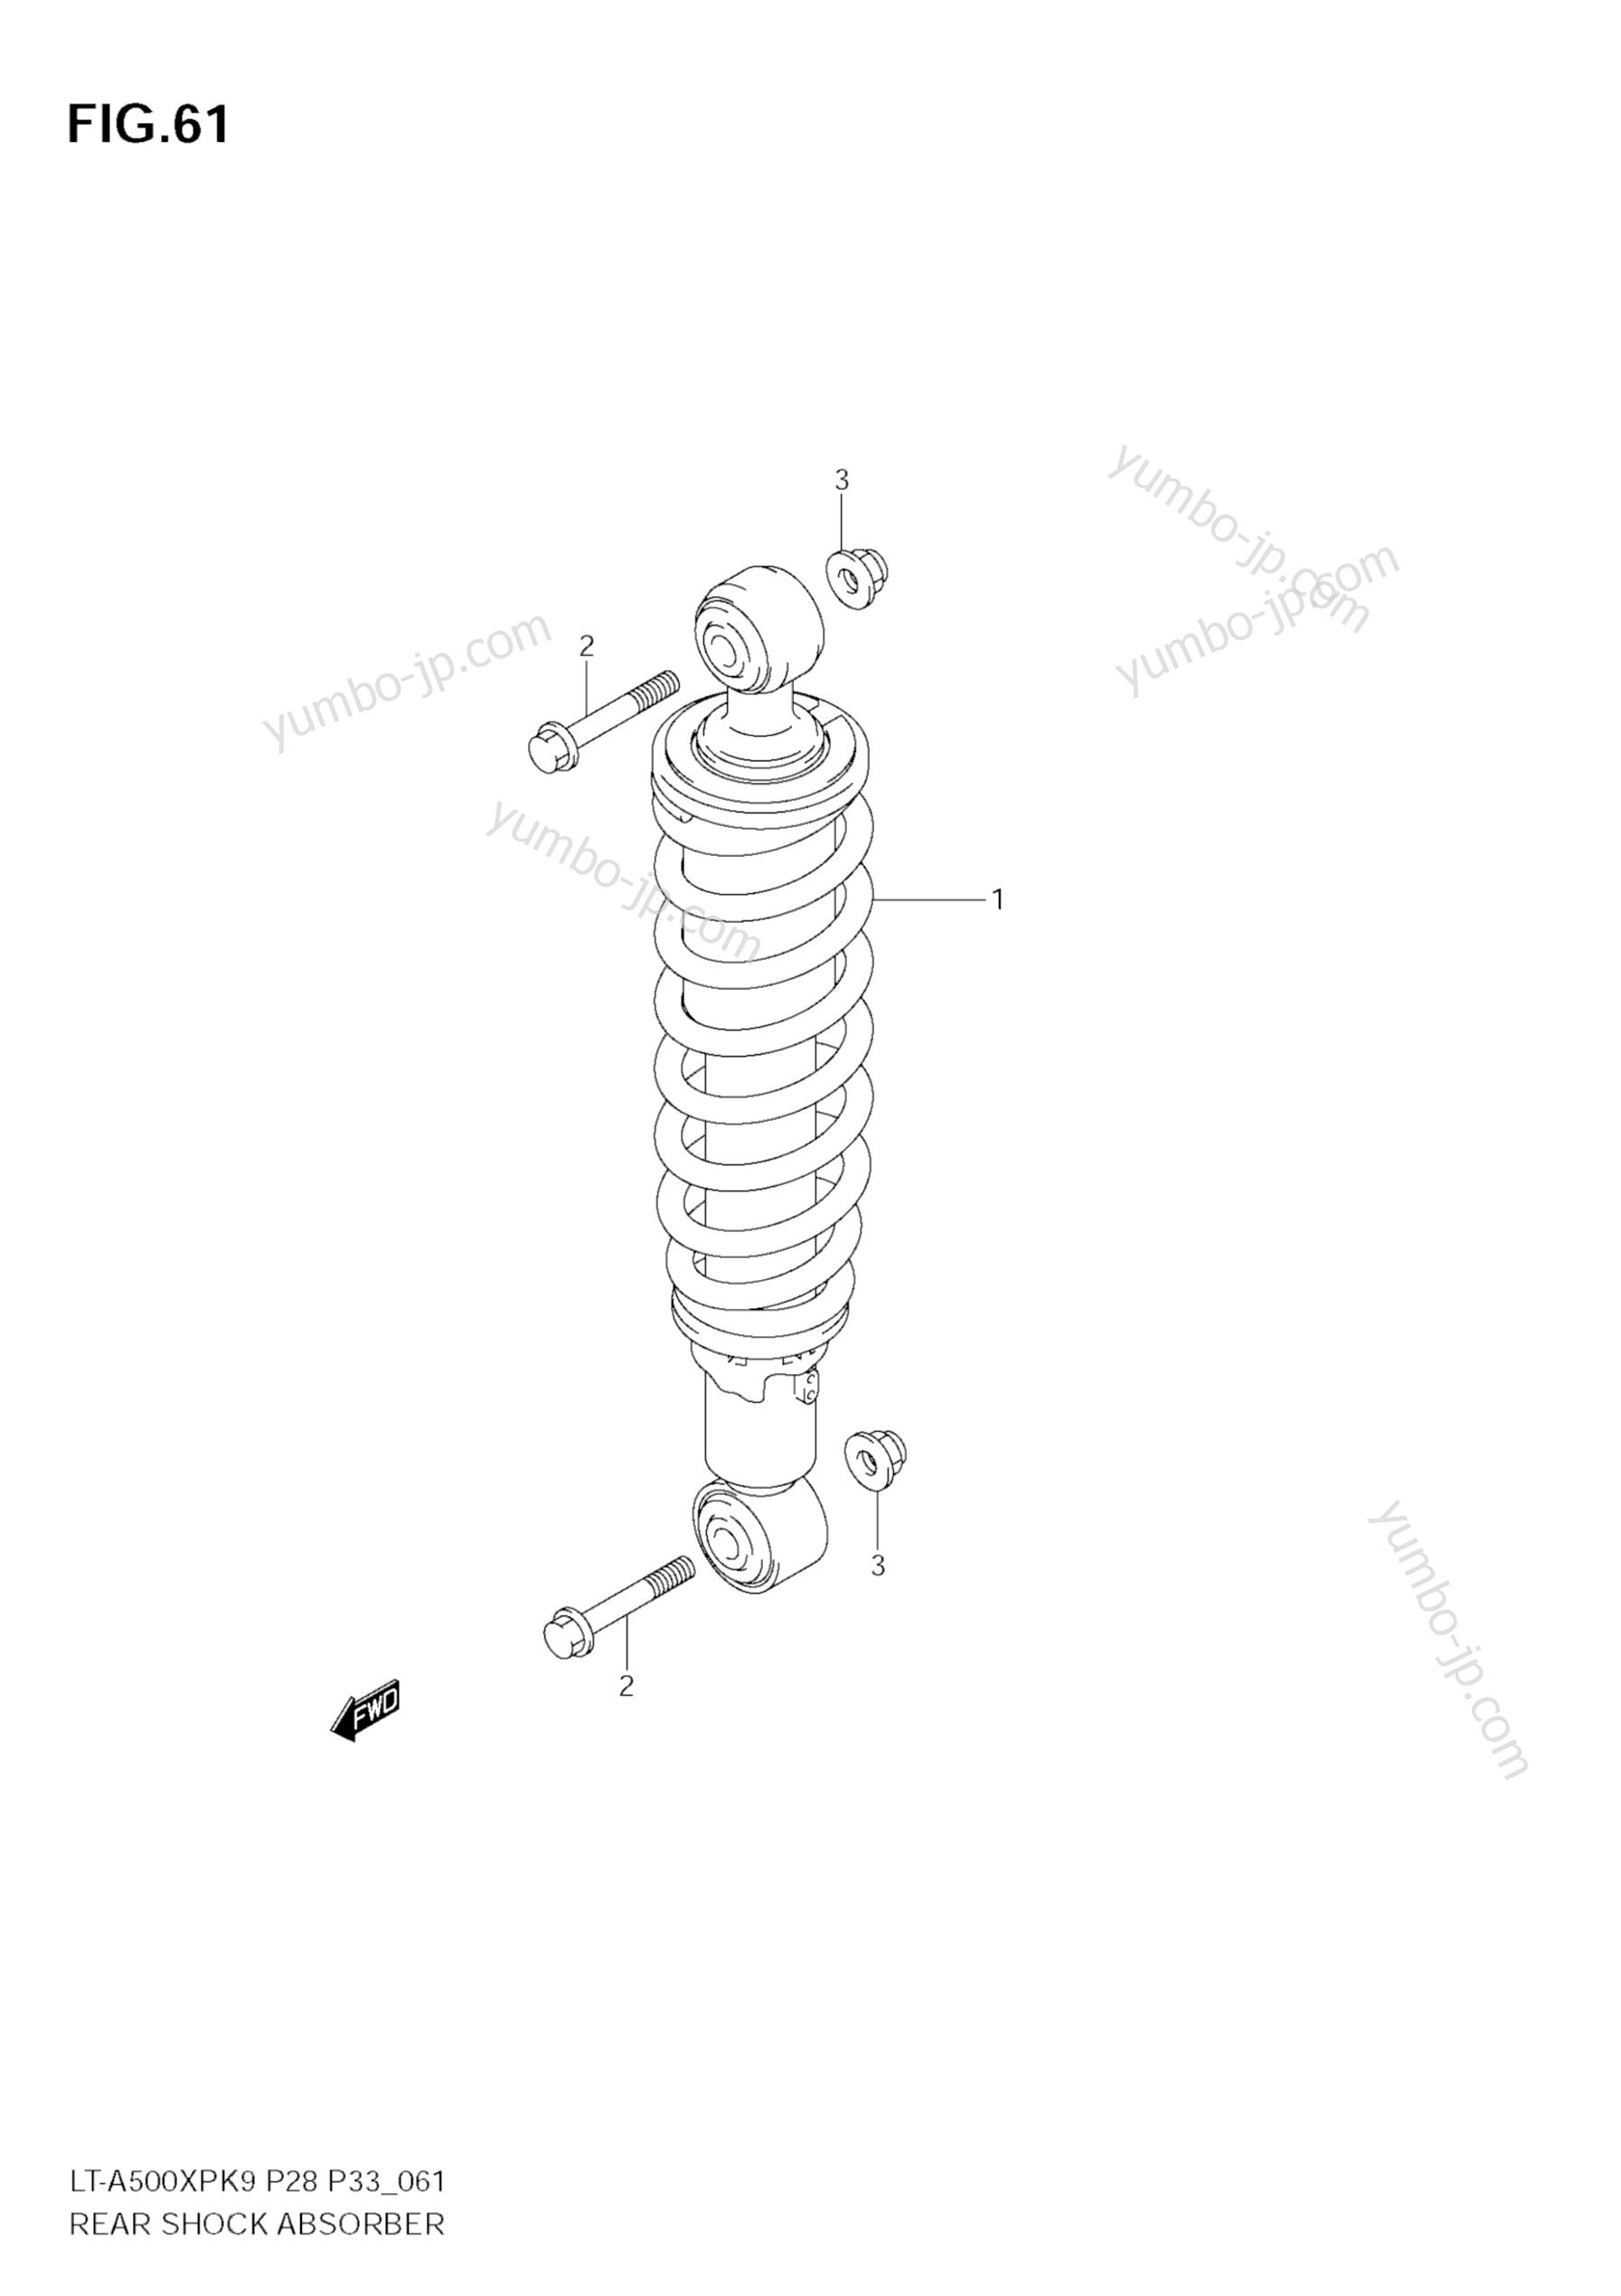 REAR SHOCK ABSORBER for ATVs SUZUKI KingQuad (LT-A500XP) 2009 year